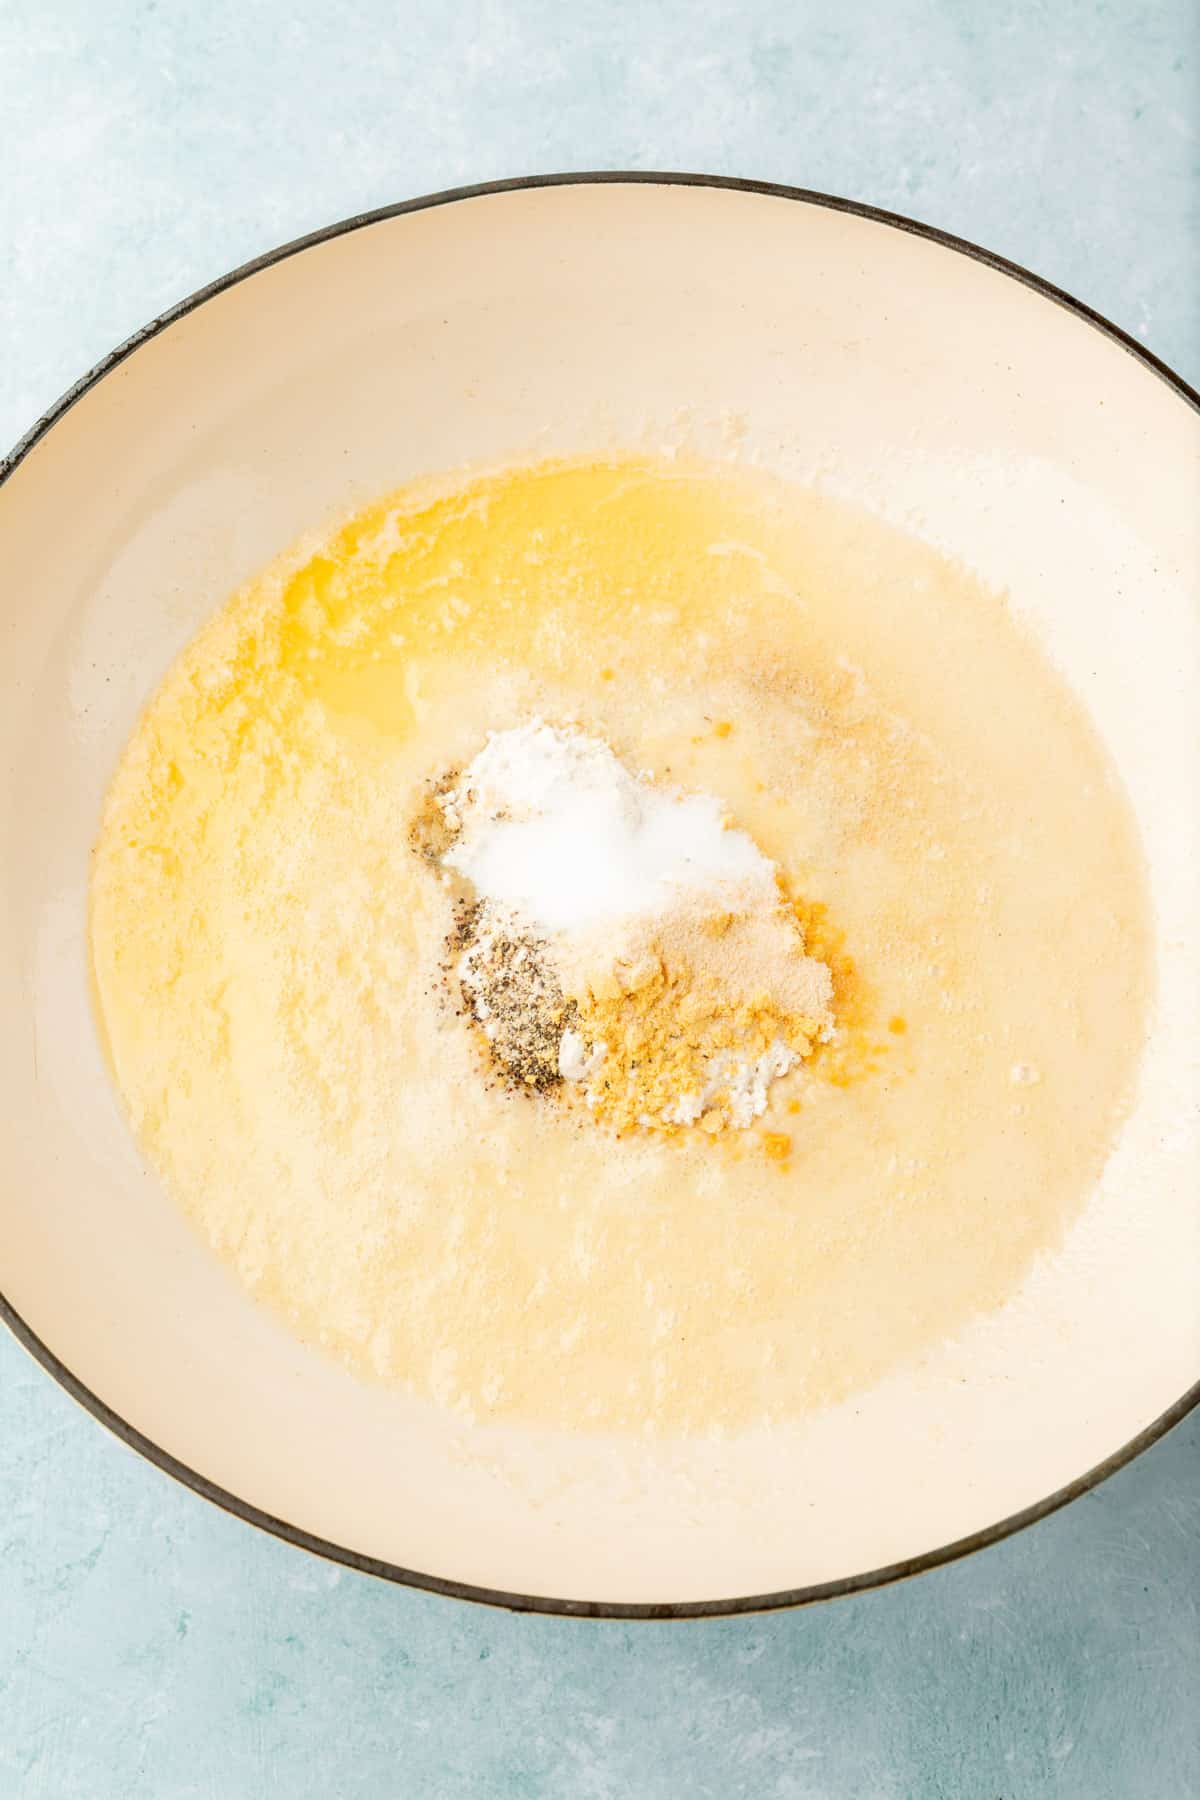 Melted butter, salt, pepper, gluten-free flour, onion powder and dry mustard powder in a skillet before mixing together.